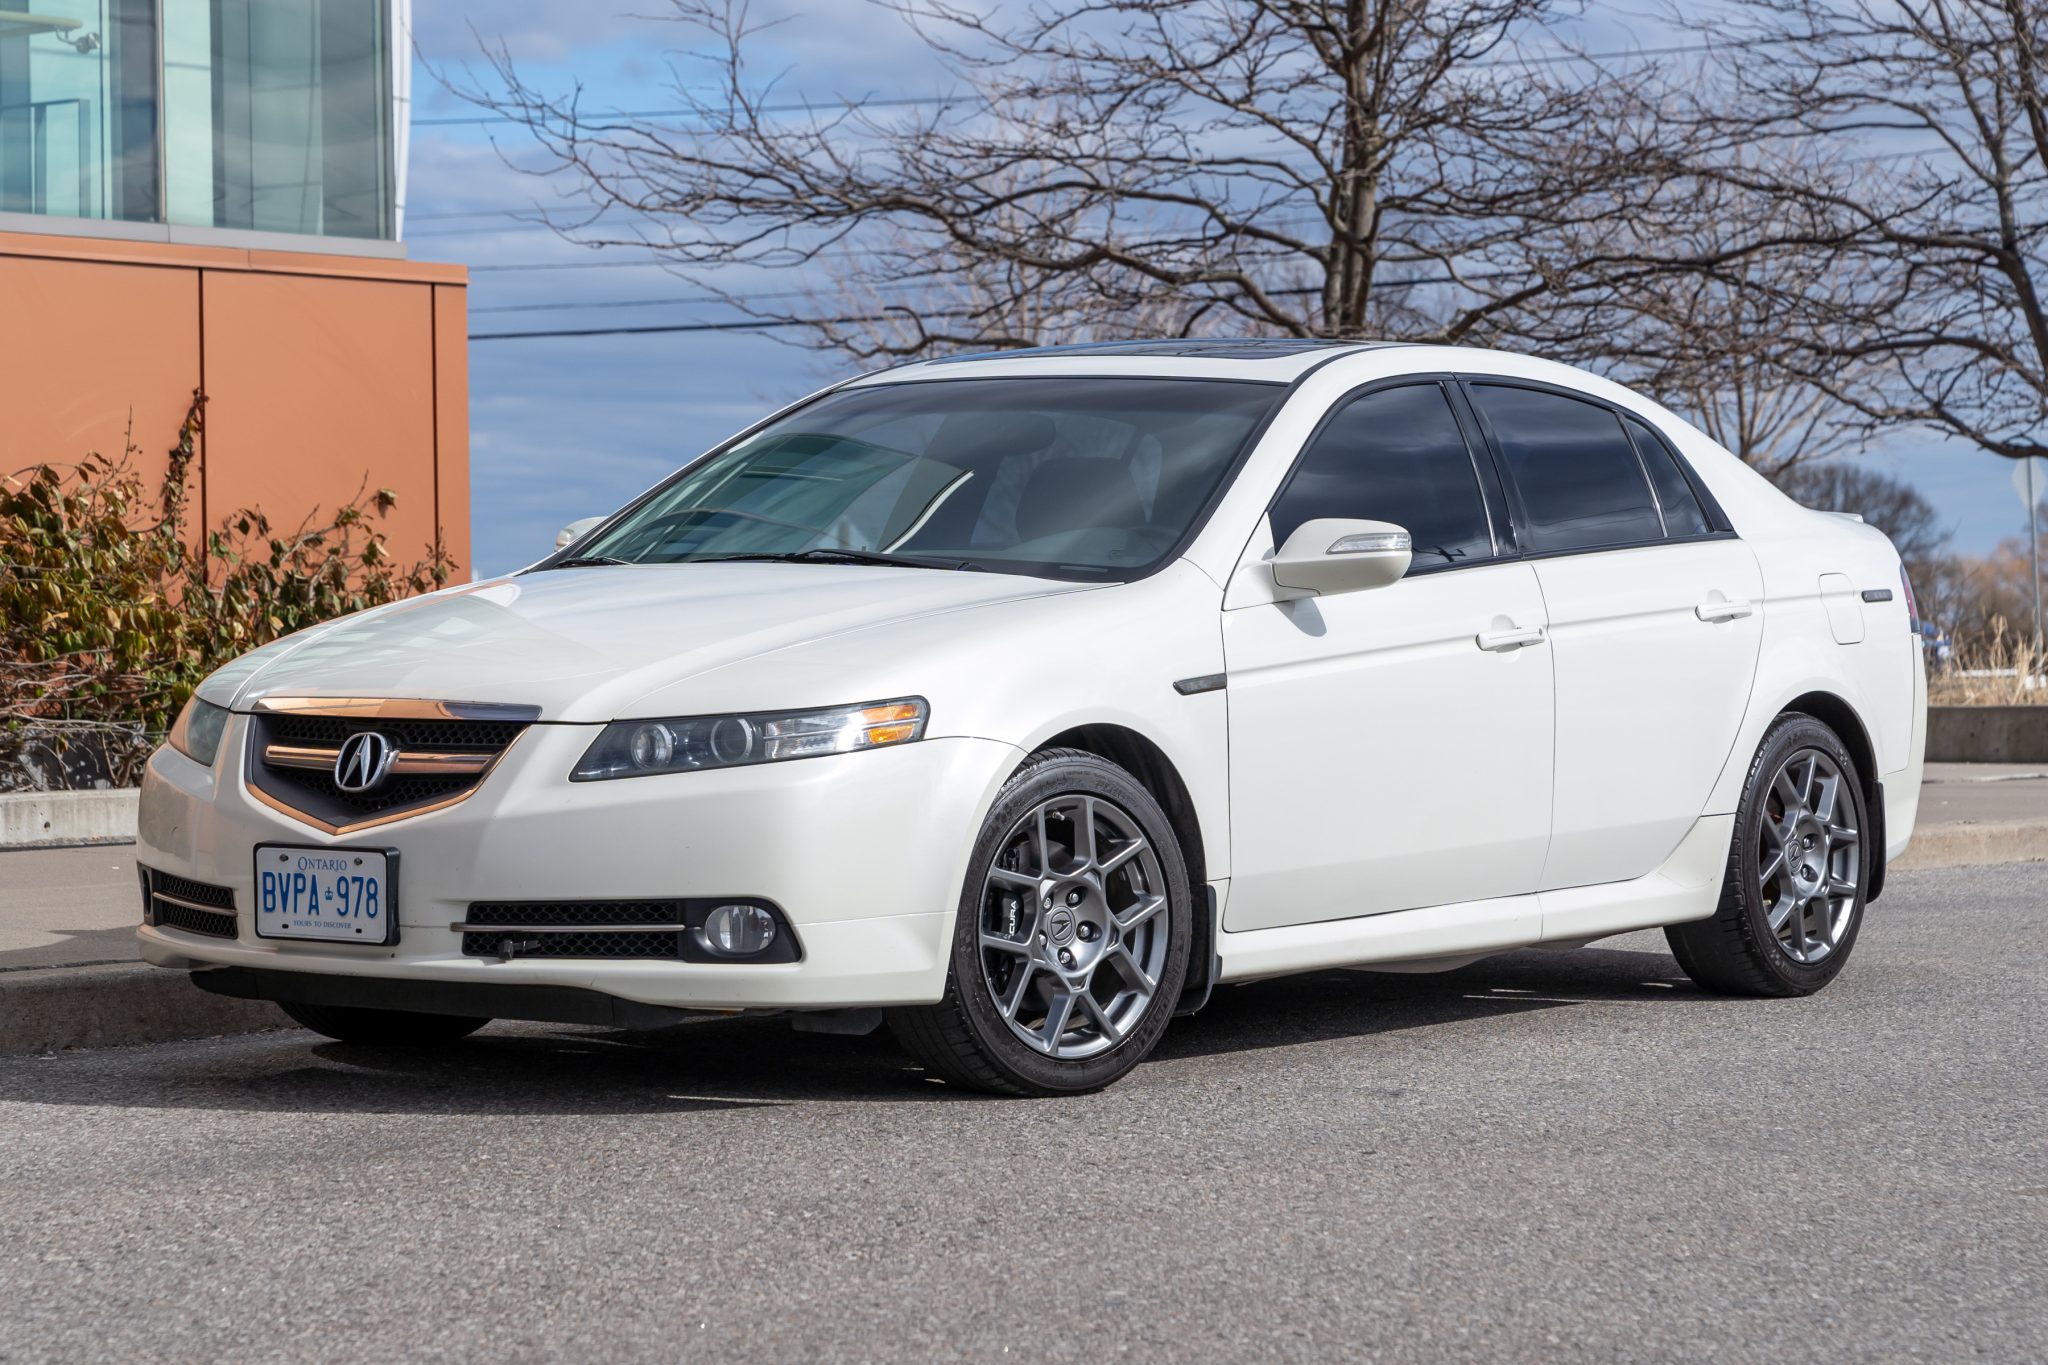 Used 2007 Acura TL Type-S 6-Speed Review